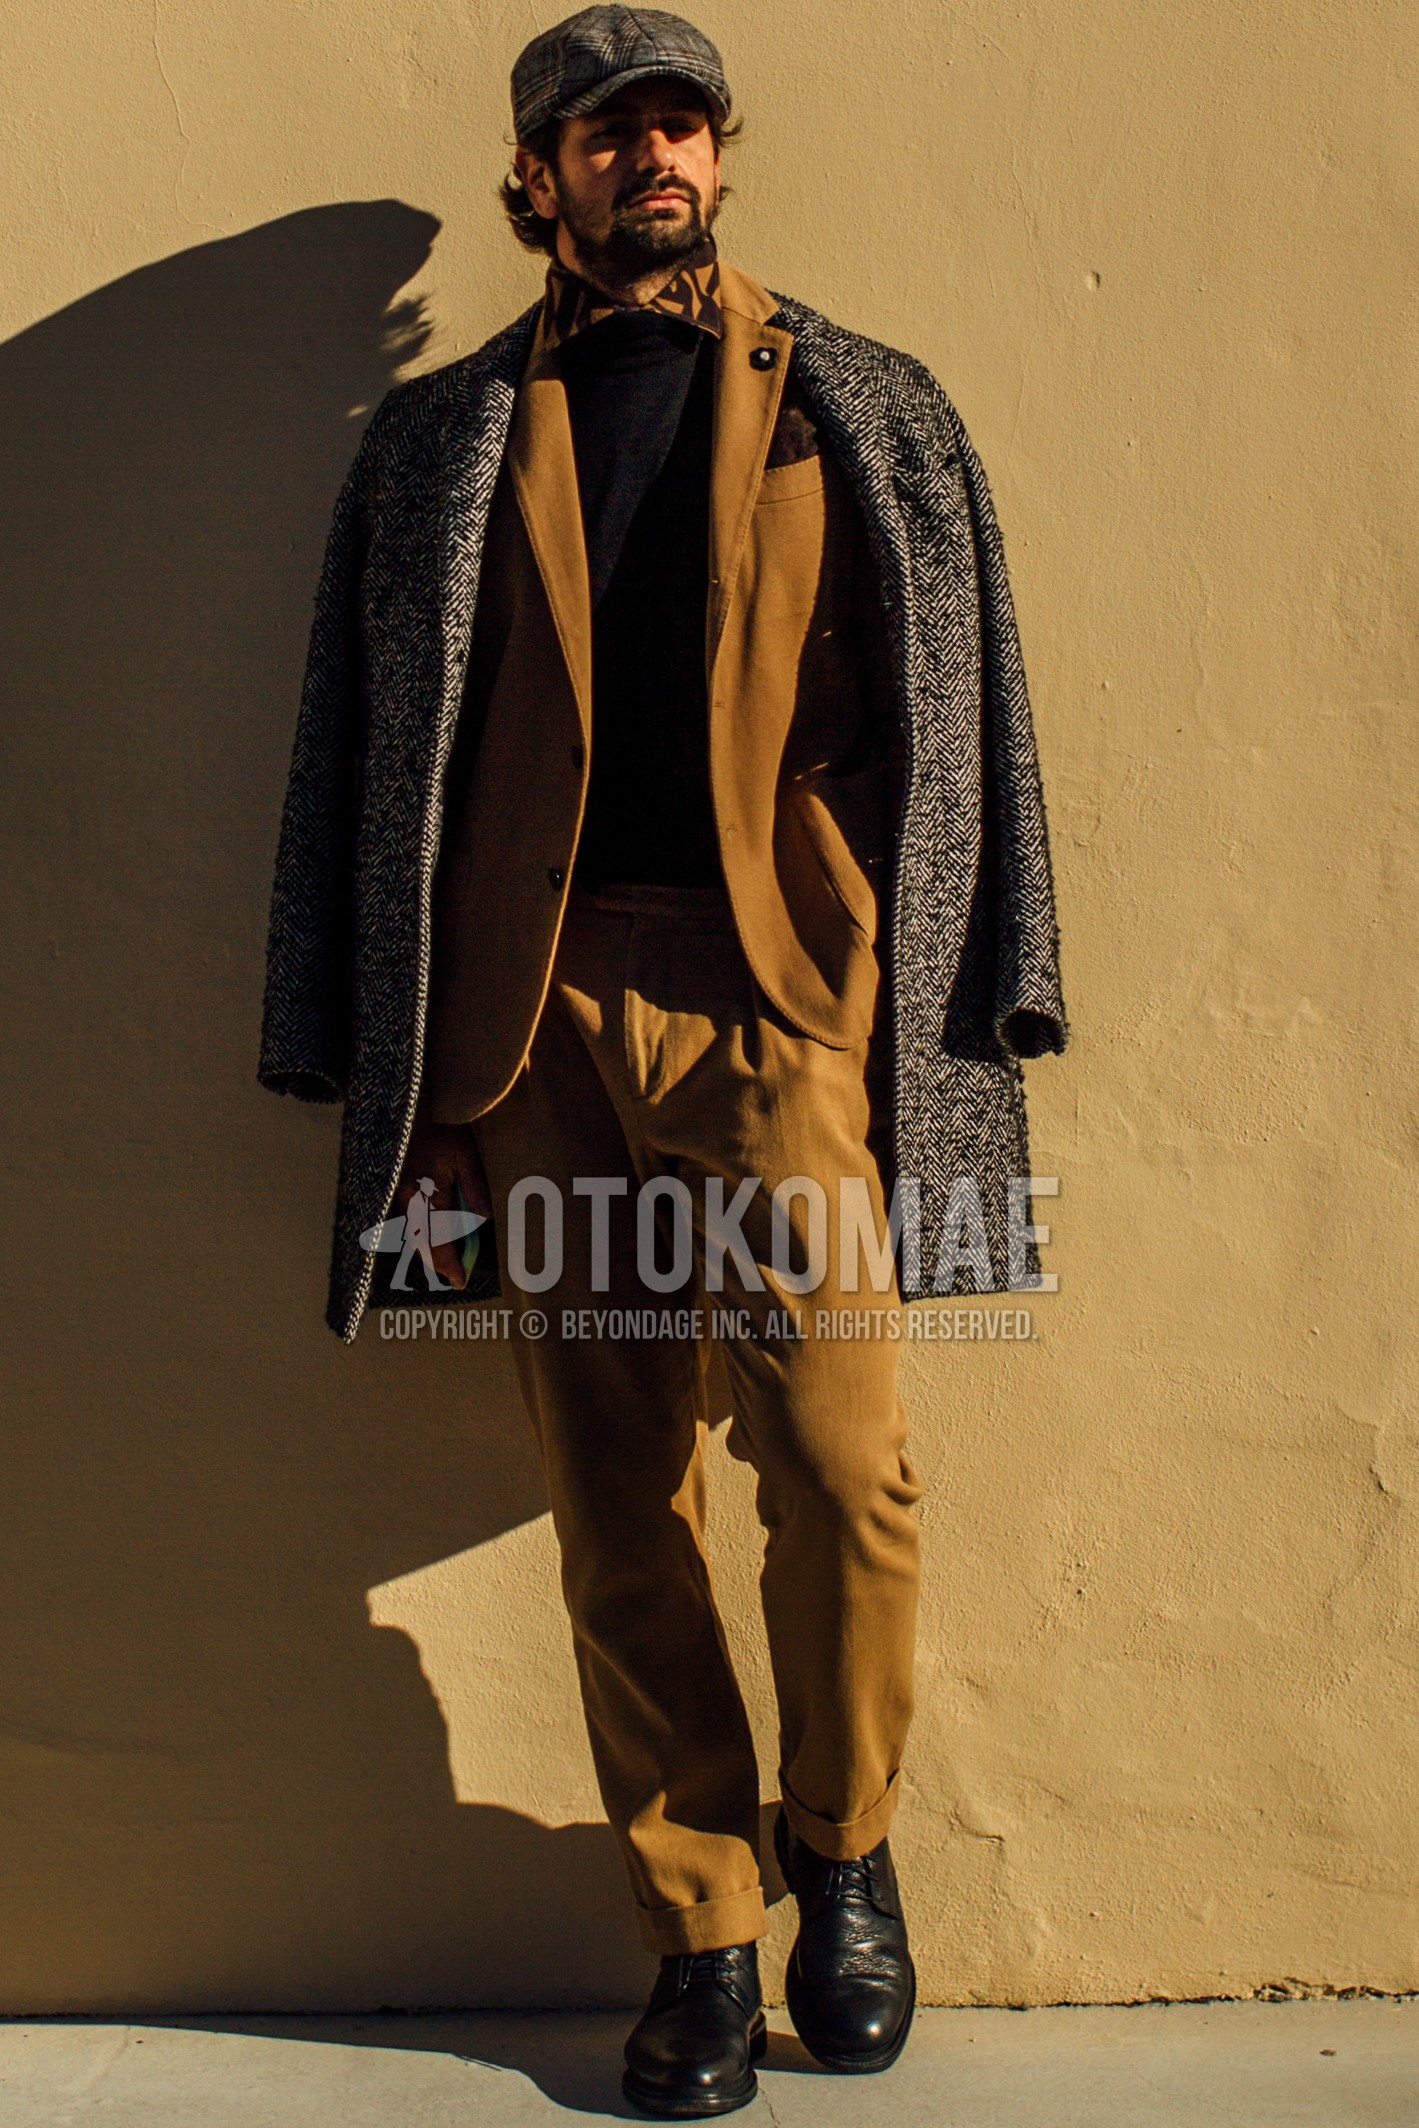 Men's spring winter outfit with gray check hunting cap, gray herringbone chester coat, black plain sweater, yellow orange tops/innerwear shirt, black plain toe leather shoes, beige plain suit.